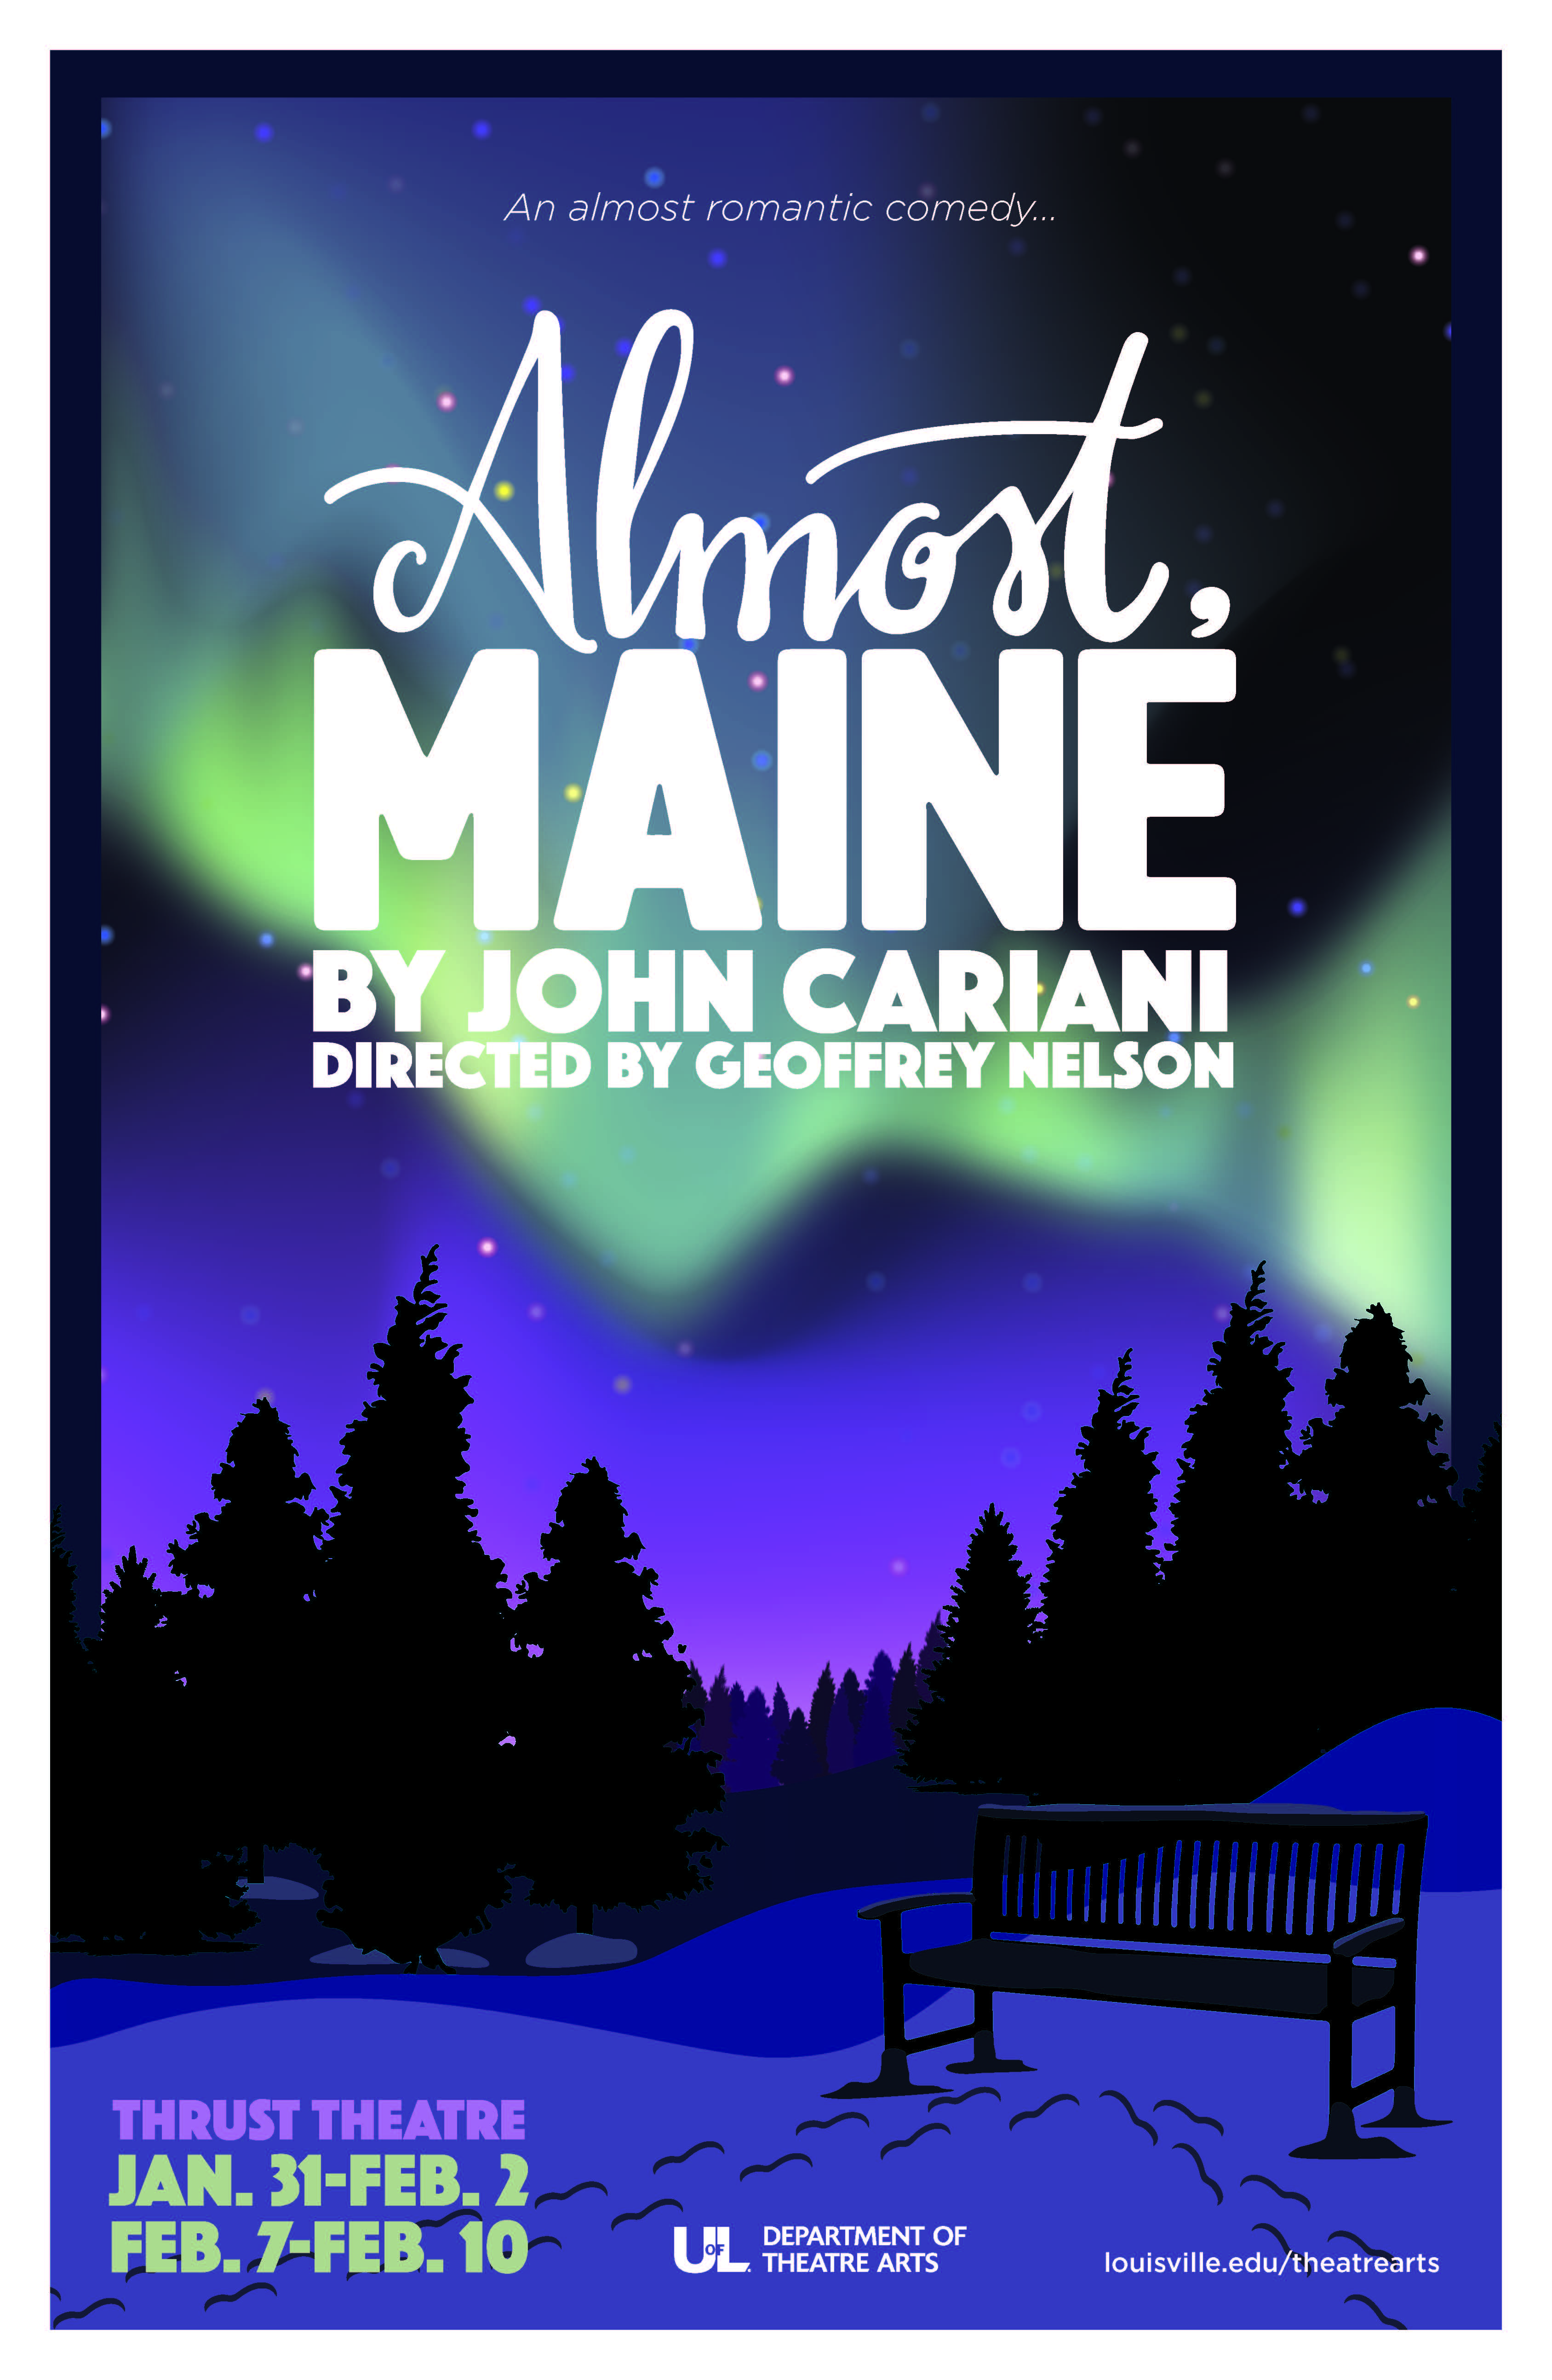 almost maine poster